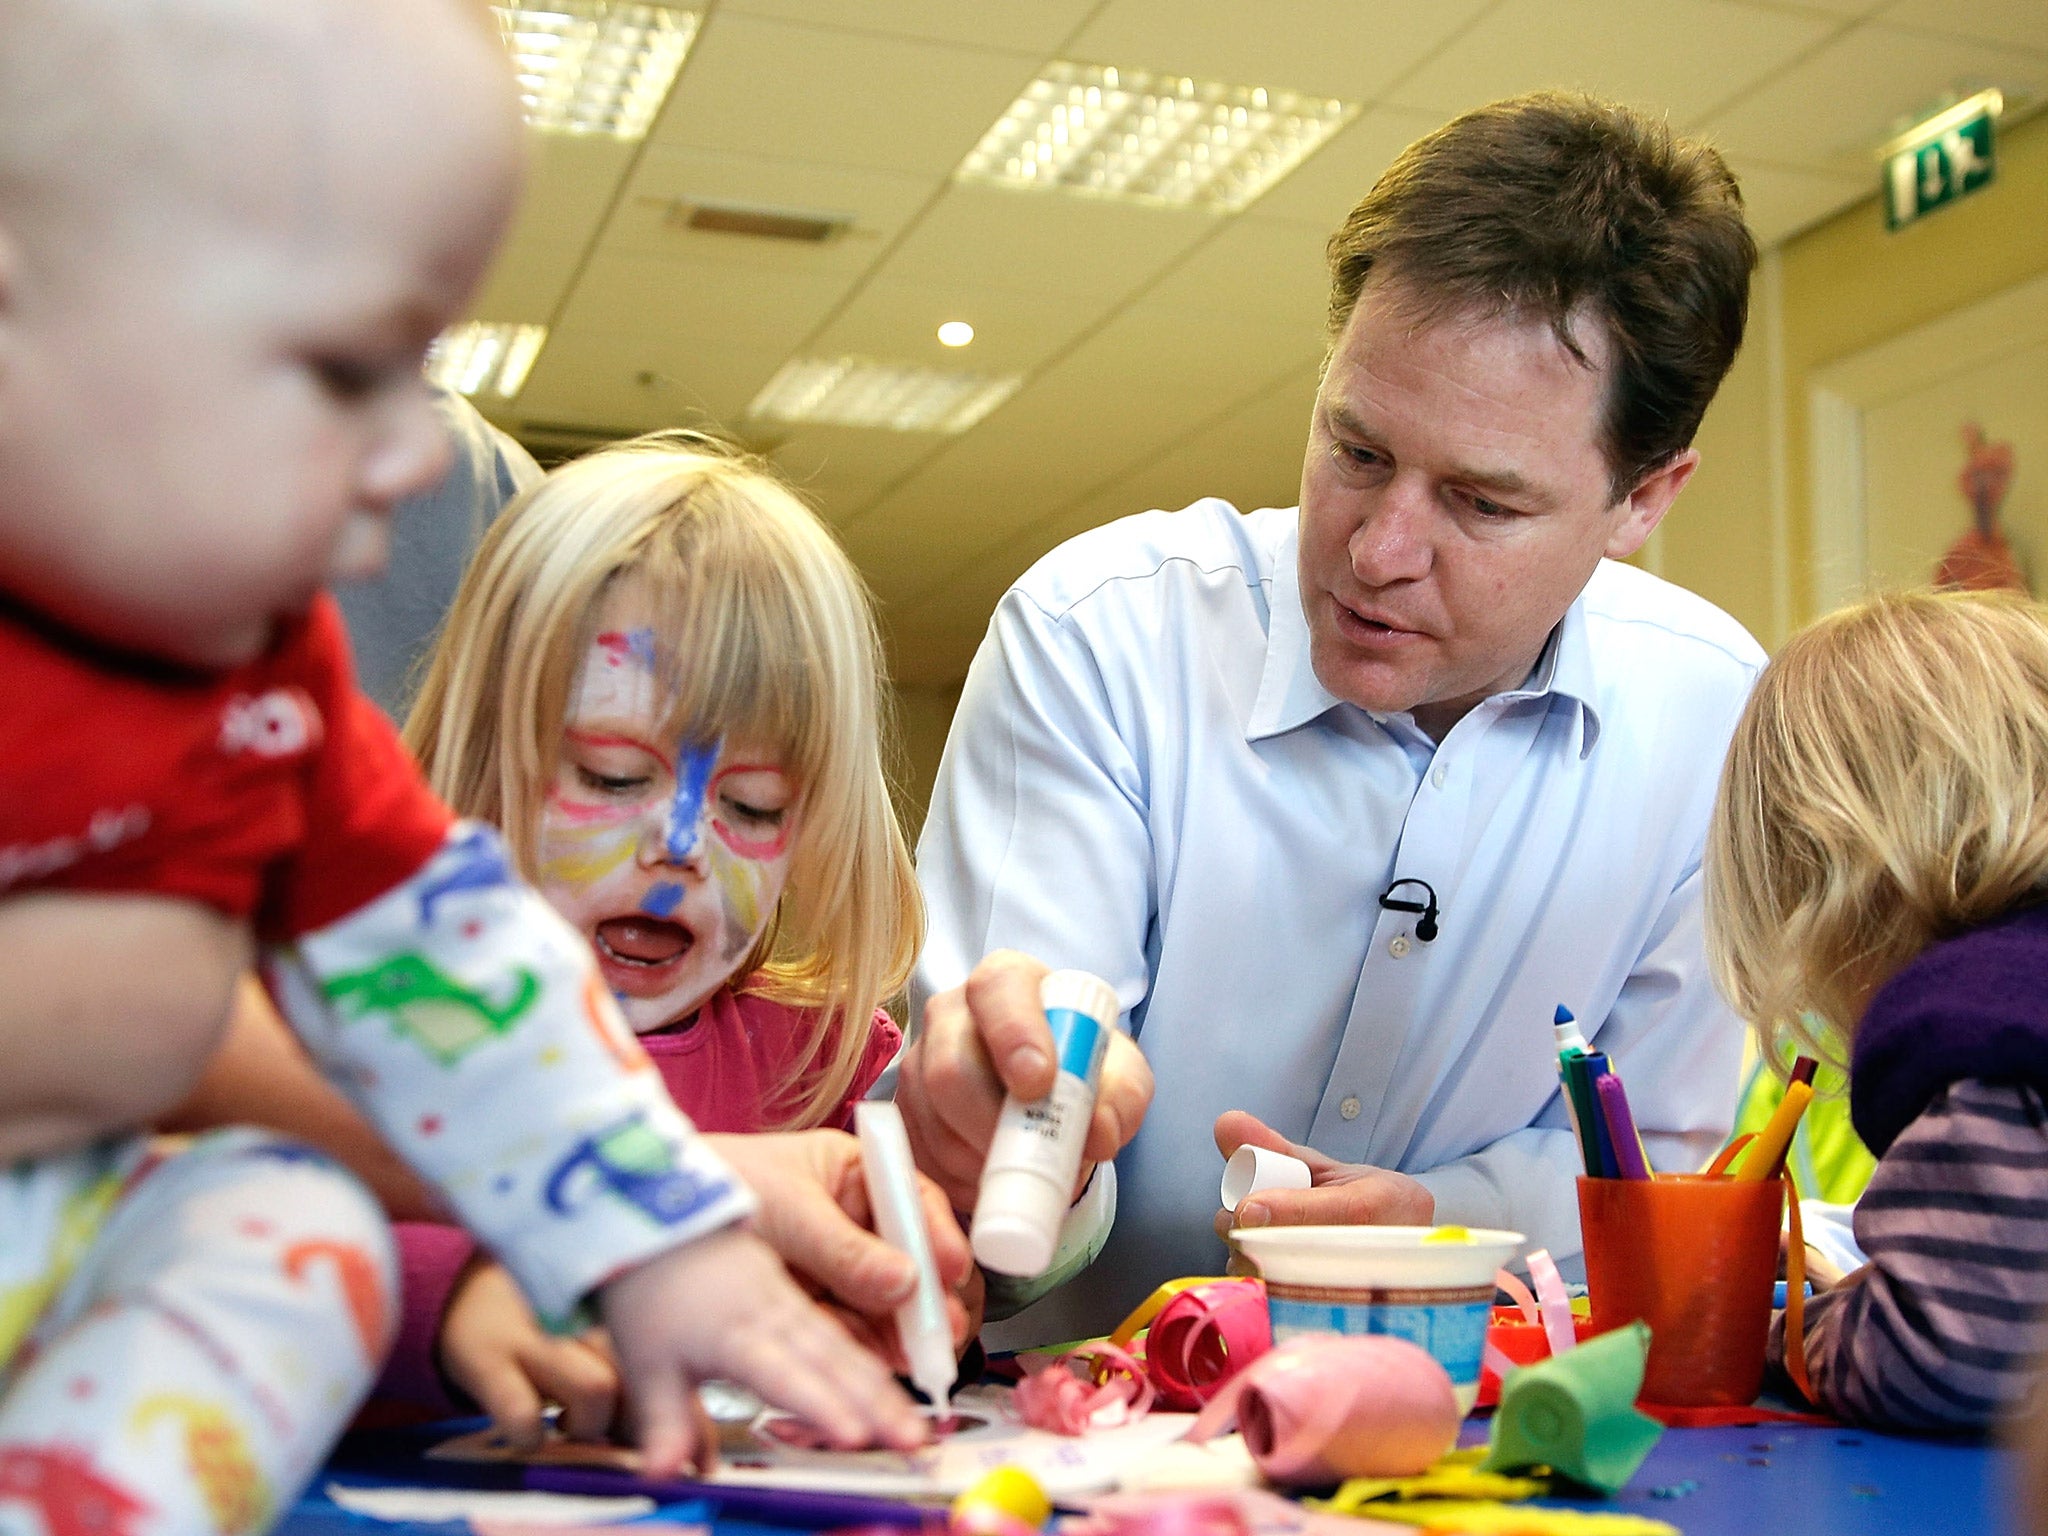 The Deputy Prime Minister said there is no real evidence that the scheme would reduce the cost of childcare